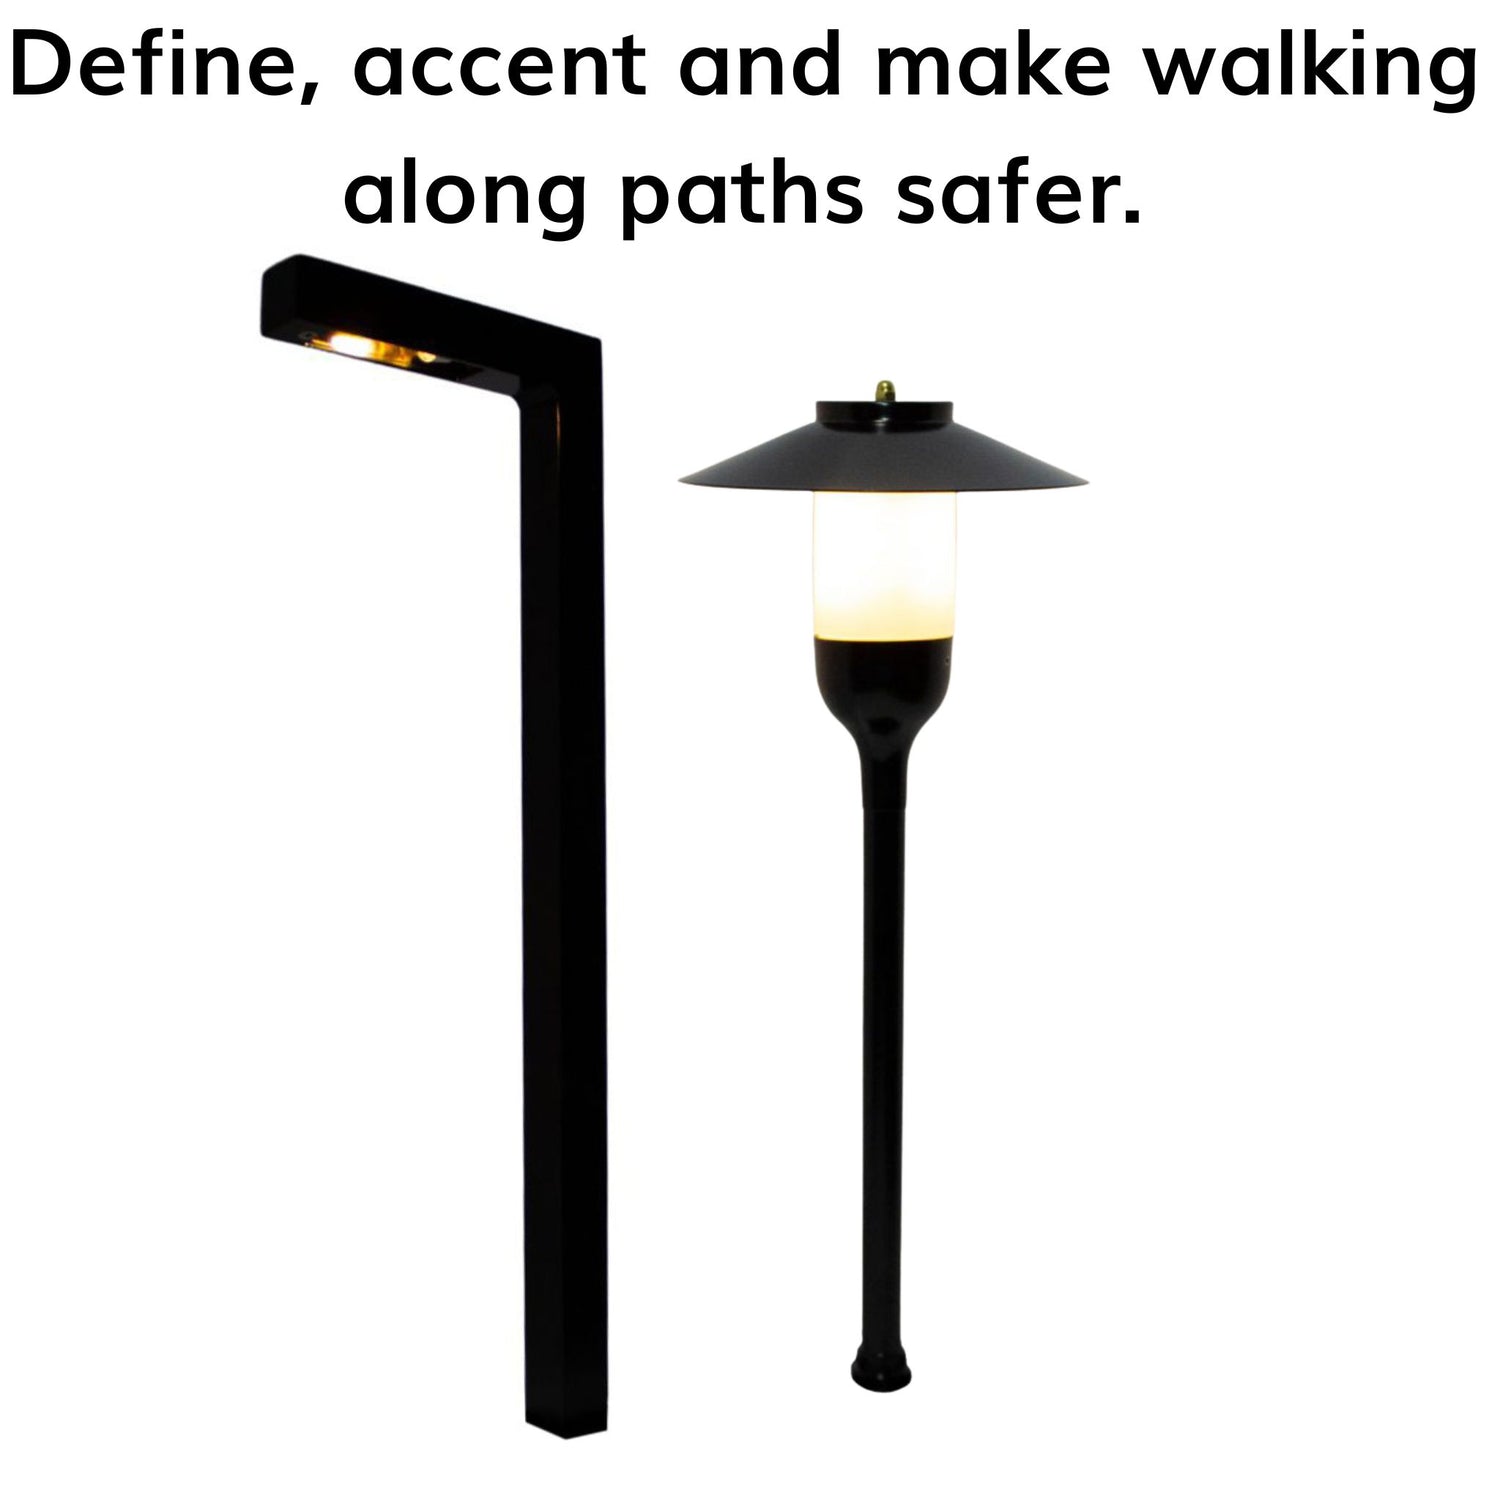 Define, accent and make walking along paths safer with LED Path Lights.